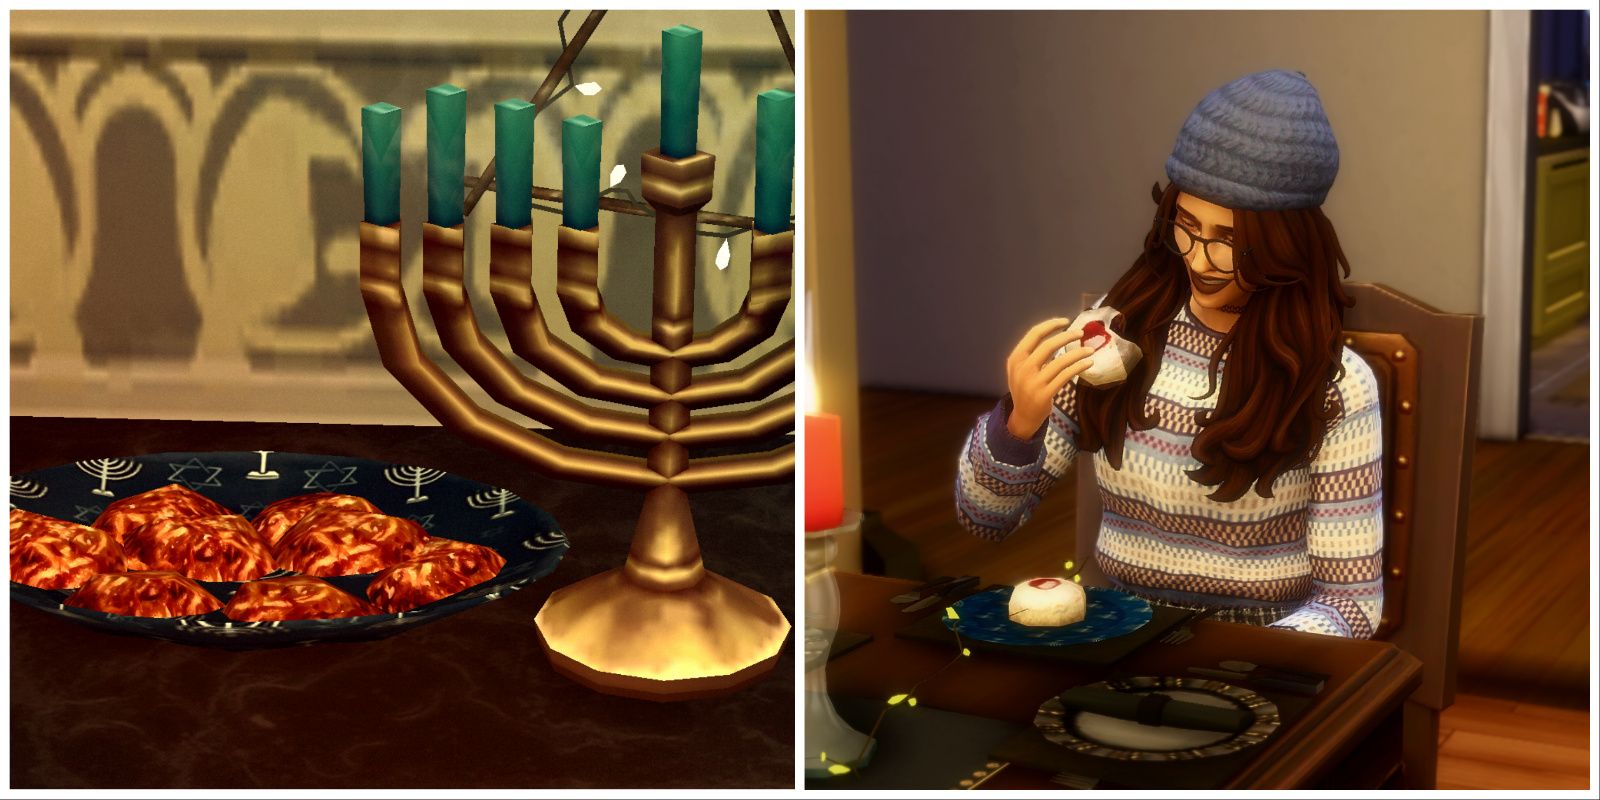 Left side: a plate of latkes sits atop a table alongside a menorah with blue candles. Right: a Sim dressed in cozy winter attire enjoys eating sufganiyot while sitting at a table.